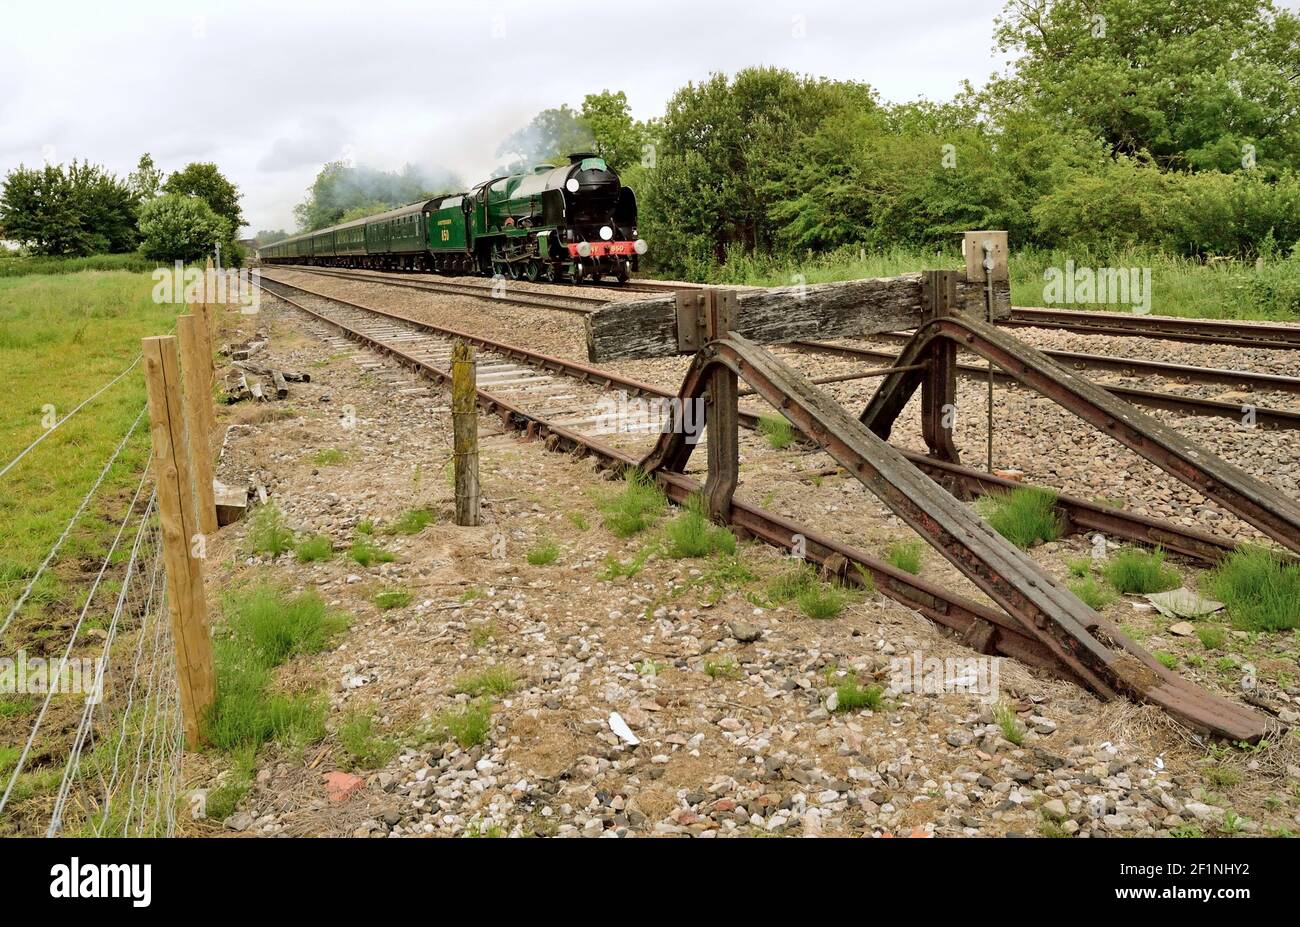 A rusty buffer stop marks the end of the siding at Great Bedwyn, as the Cathedrals Express passes on its way to Bristol. Stock Photo